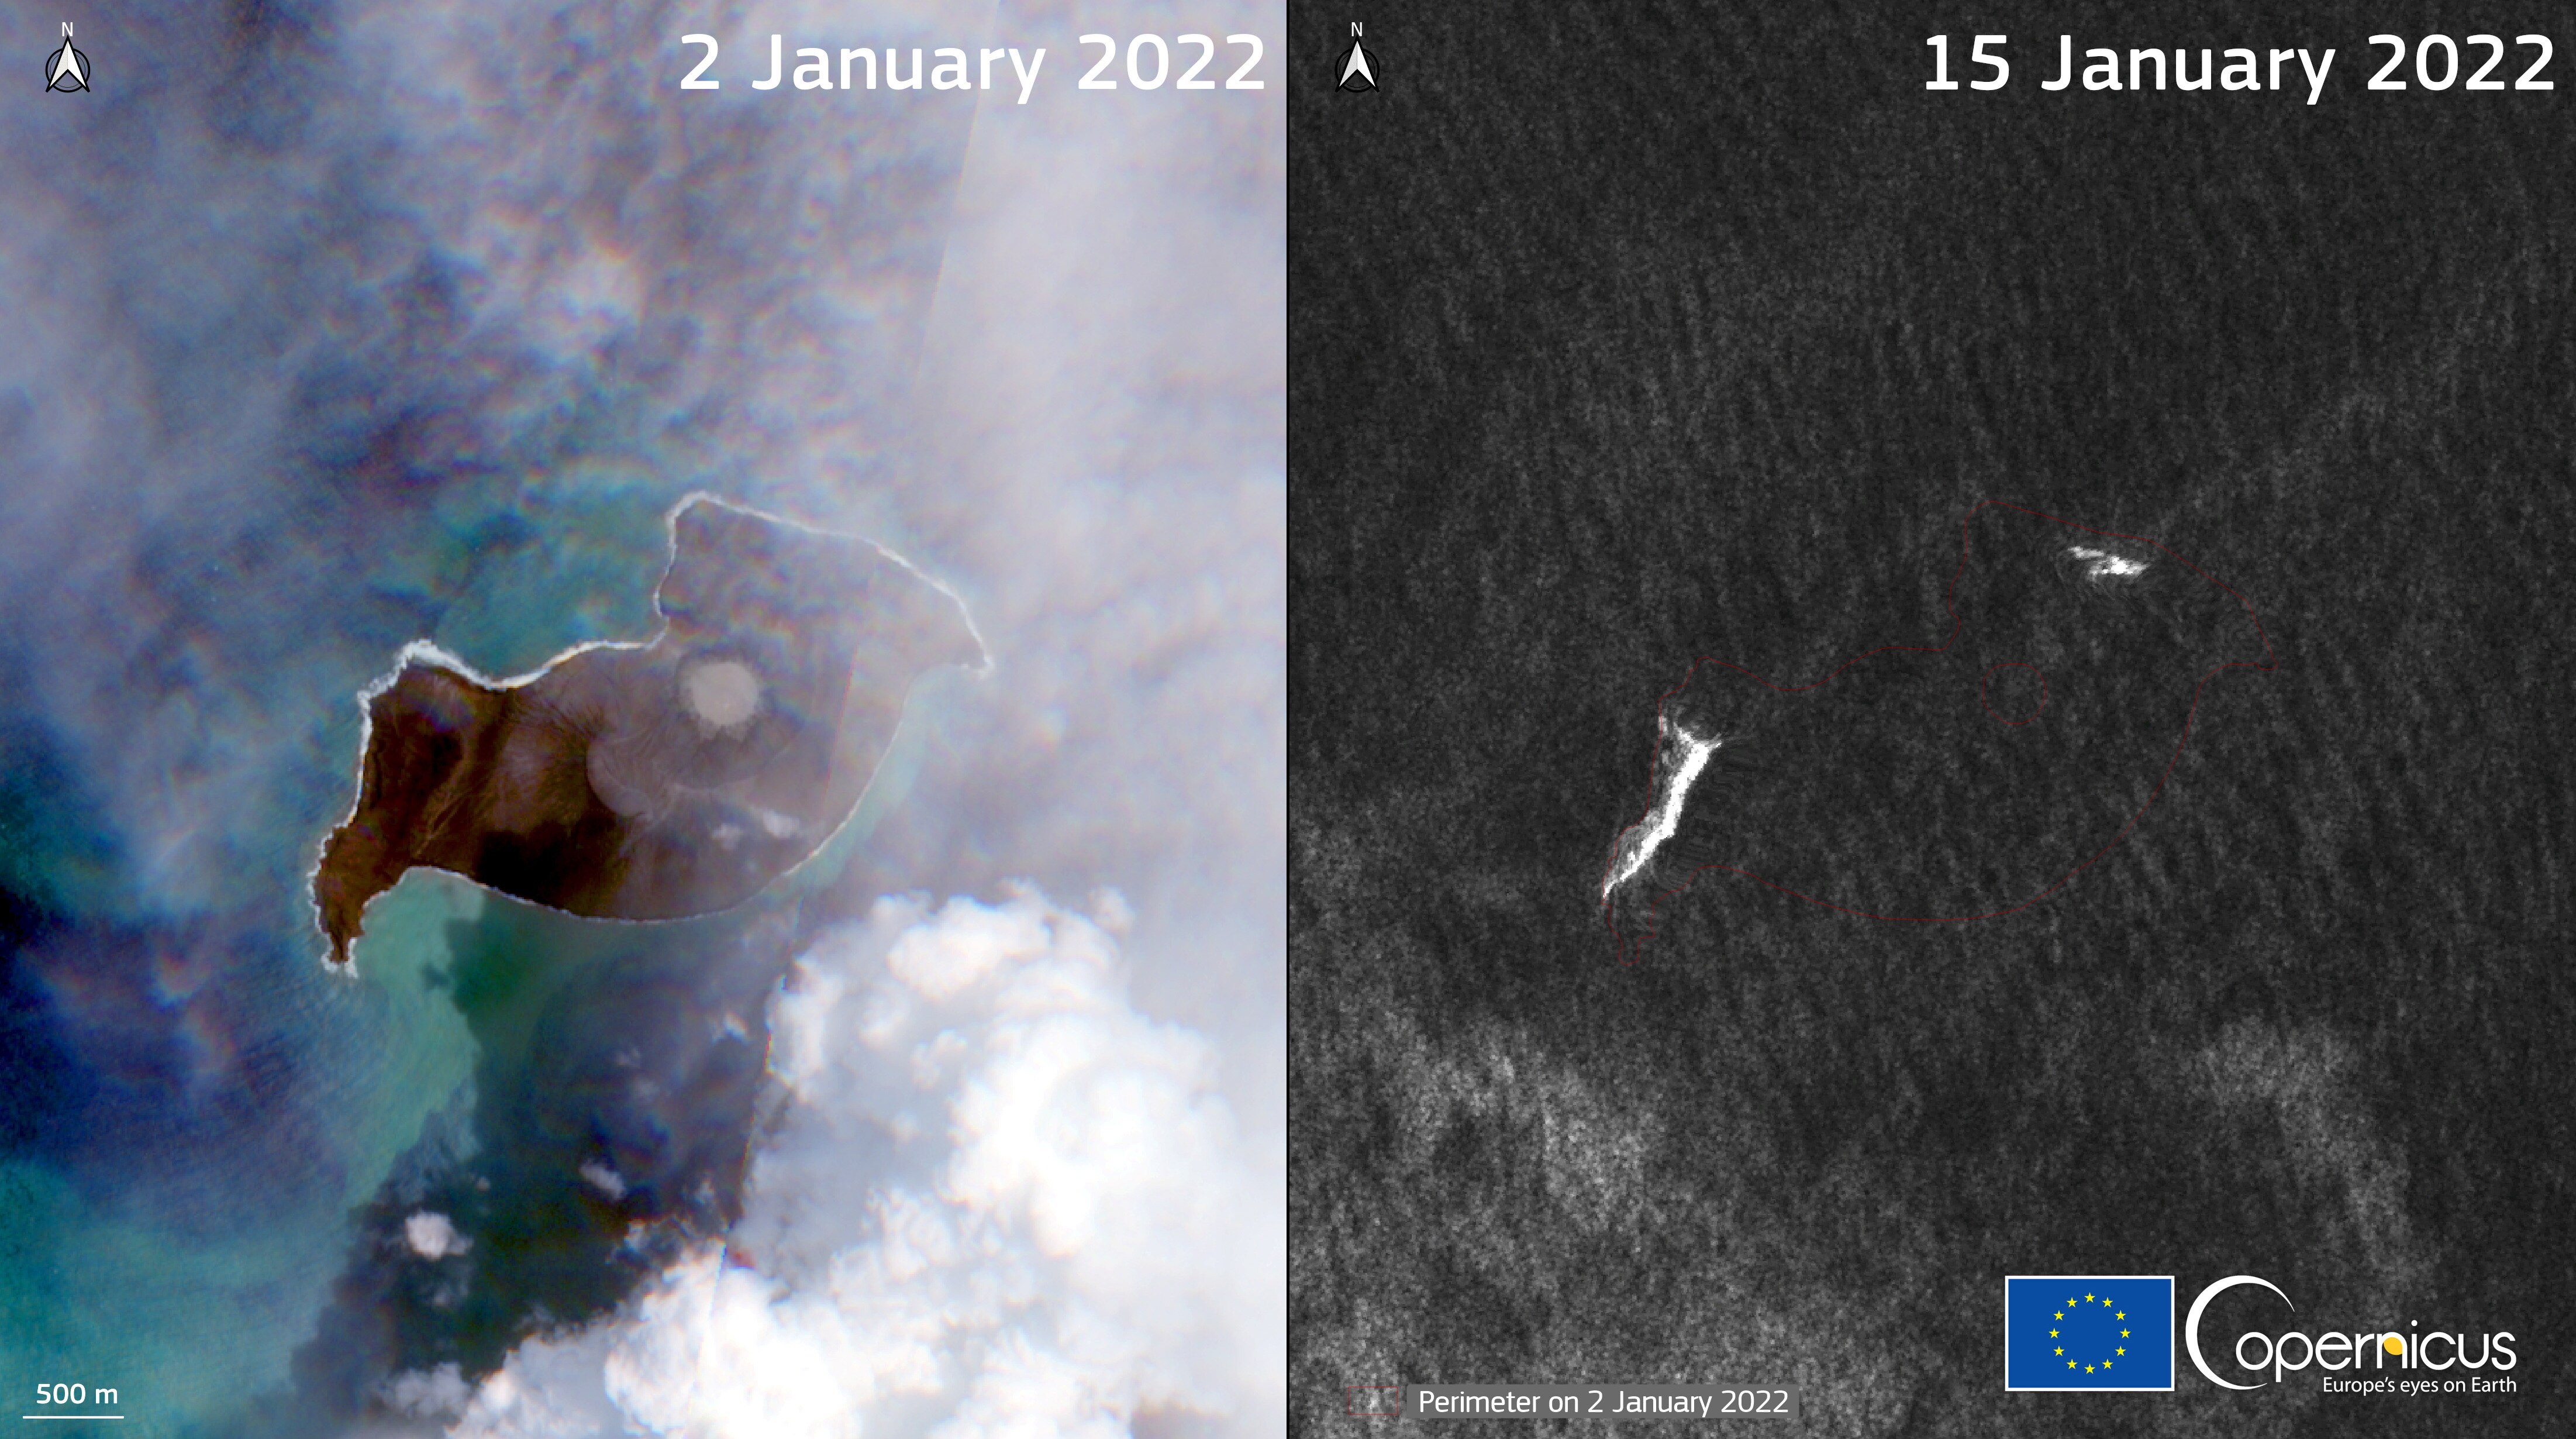 A composite satellite image shows the Hunga Tonga-Hunga Ha'apai underwater volcano before and after its eruption.